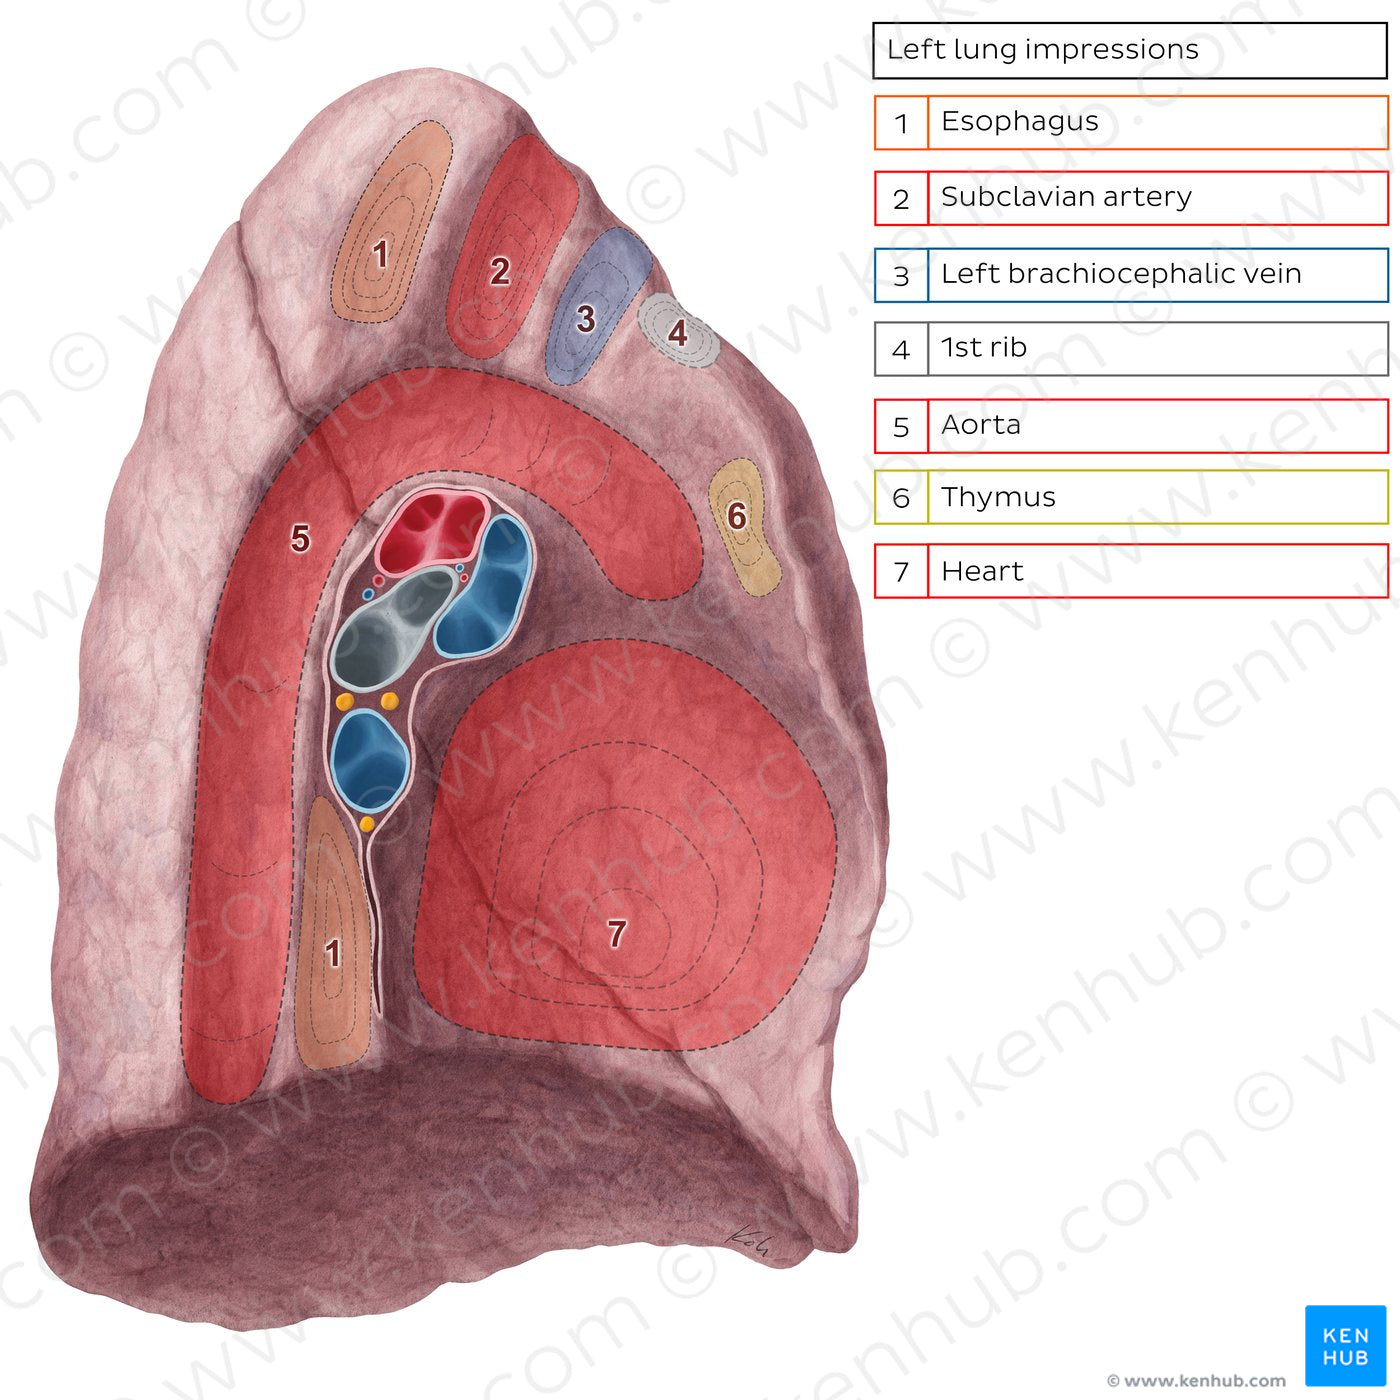 Impressions of left lung (English)